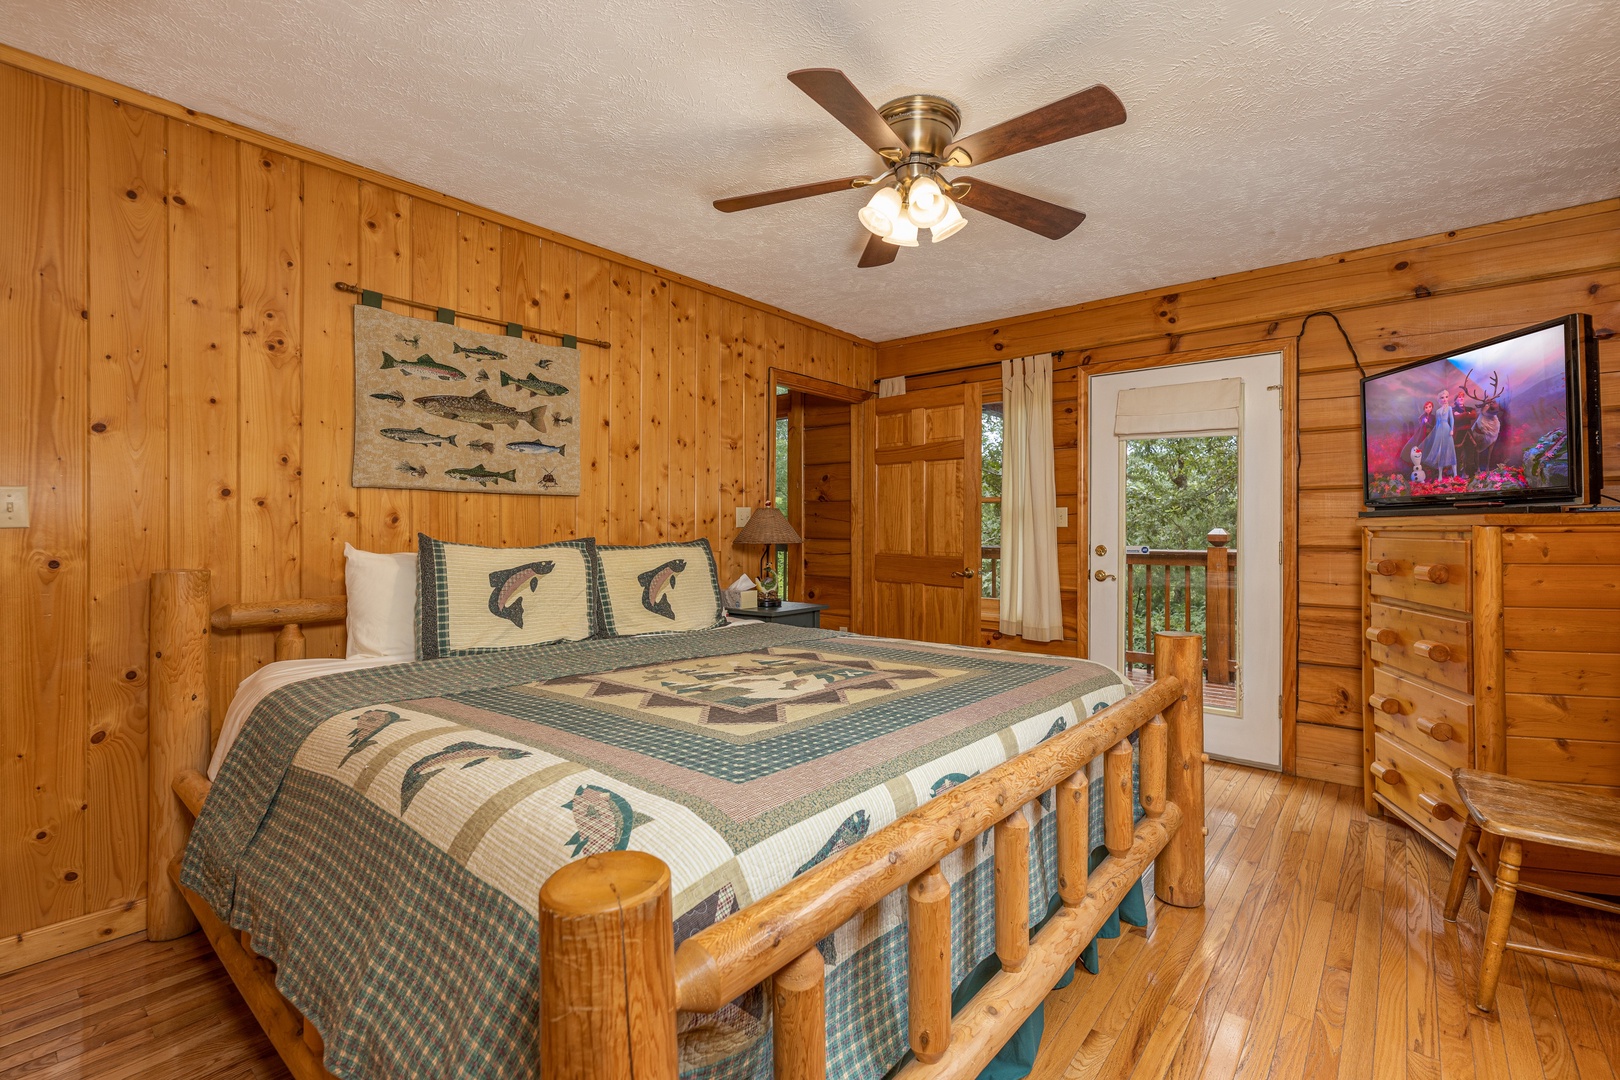 Bedroom with a king bed, dresser, TV, and deck access at Wildlife Retreat, a 3 bedroom cabin rental located in Pigeon Forge